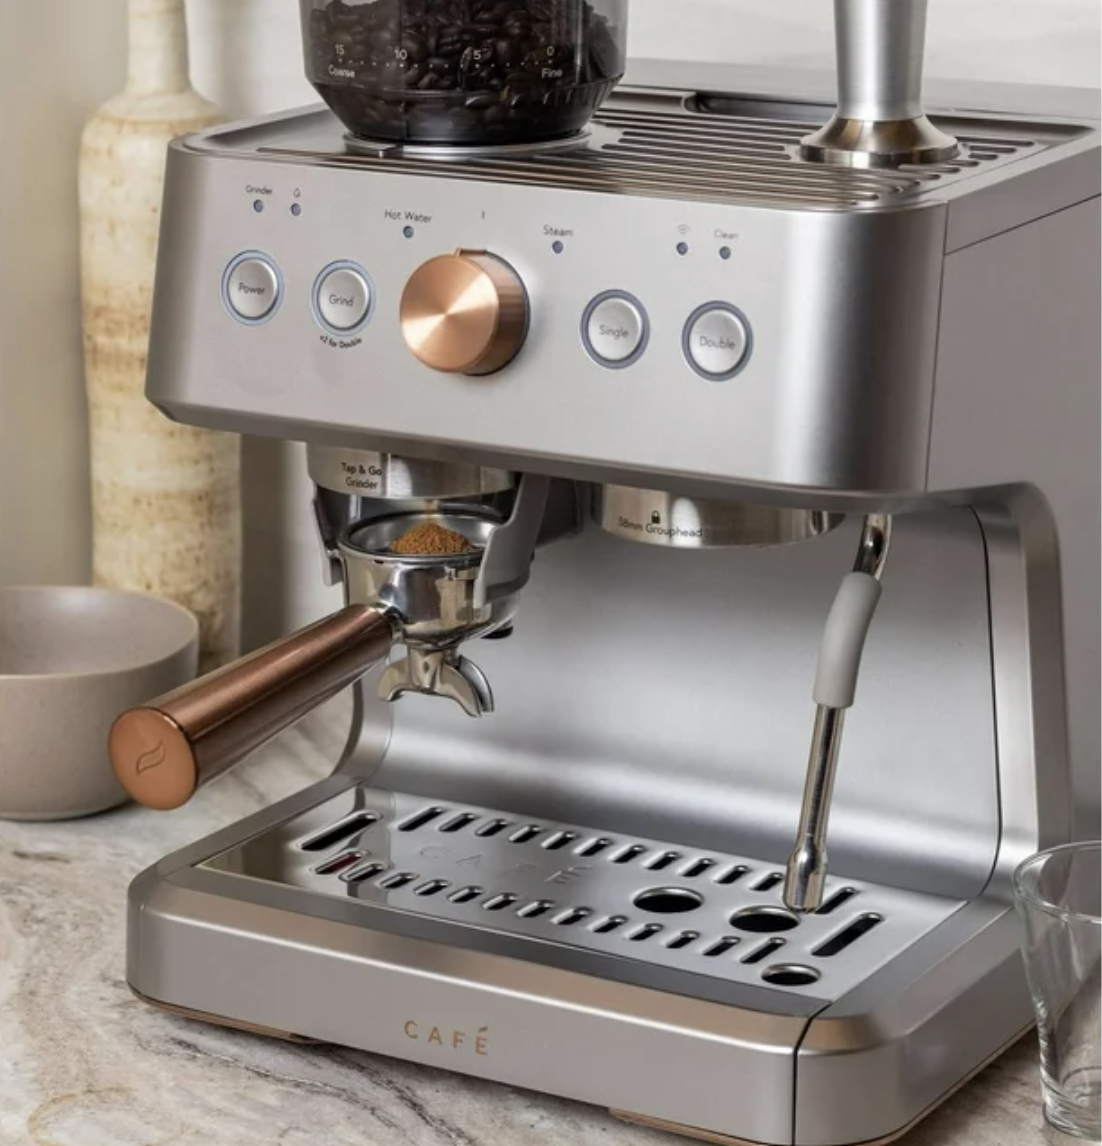 Espresso machine with coffee beans, cup, and metal finish on kitchen counter